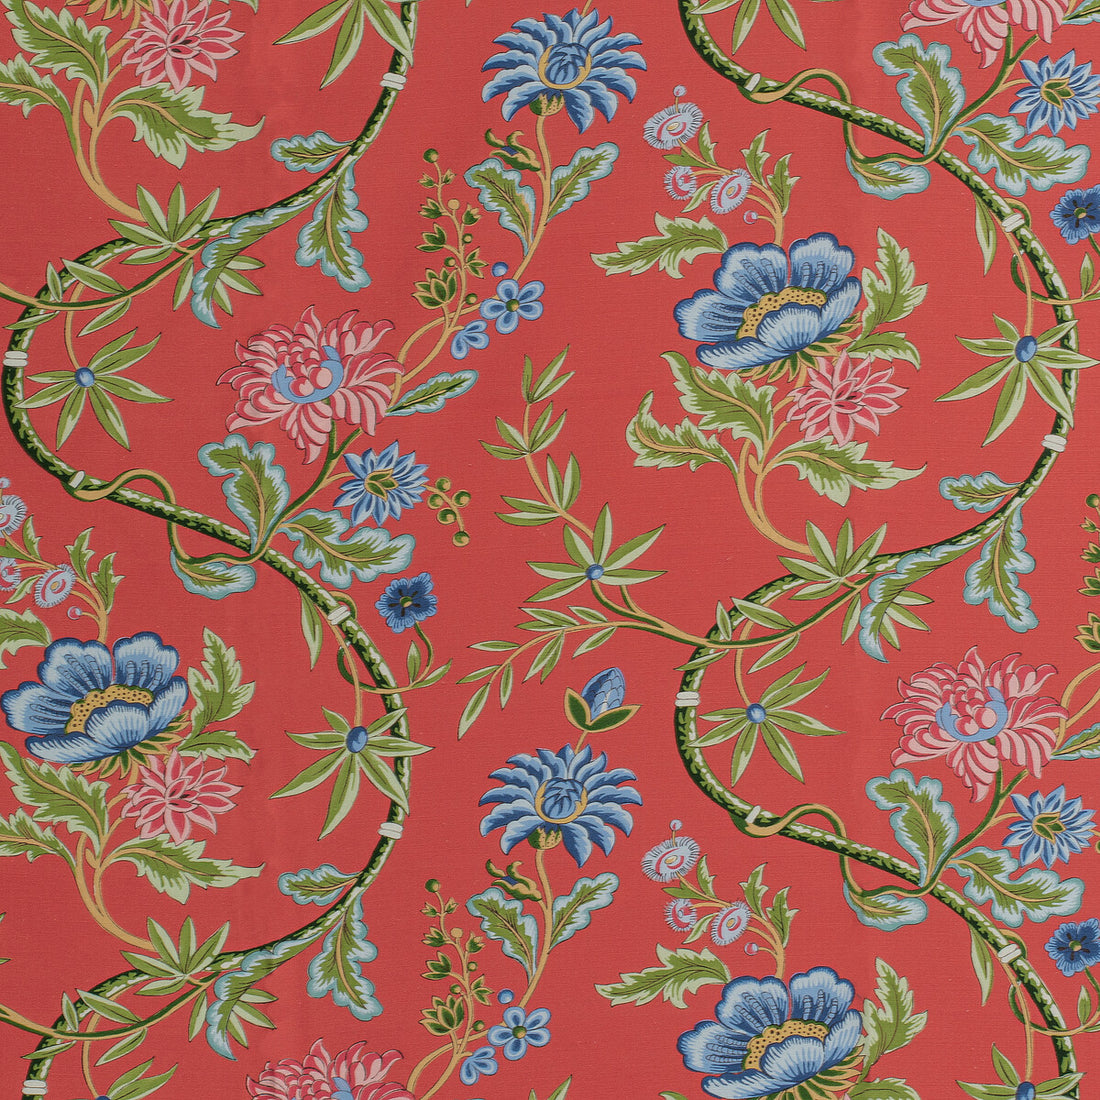 Veronique Print fabric in red color - pattern 8020122.19.0 - by Brunschwig &amp; Fils in the Louverne collection